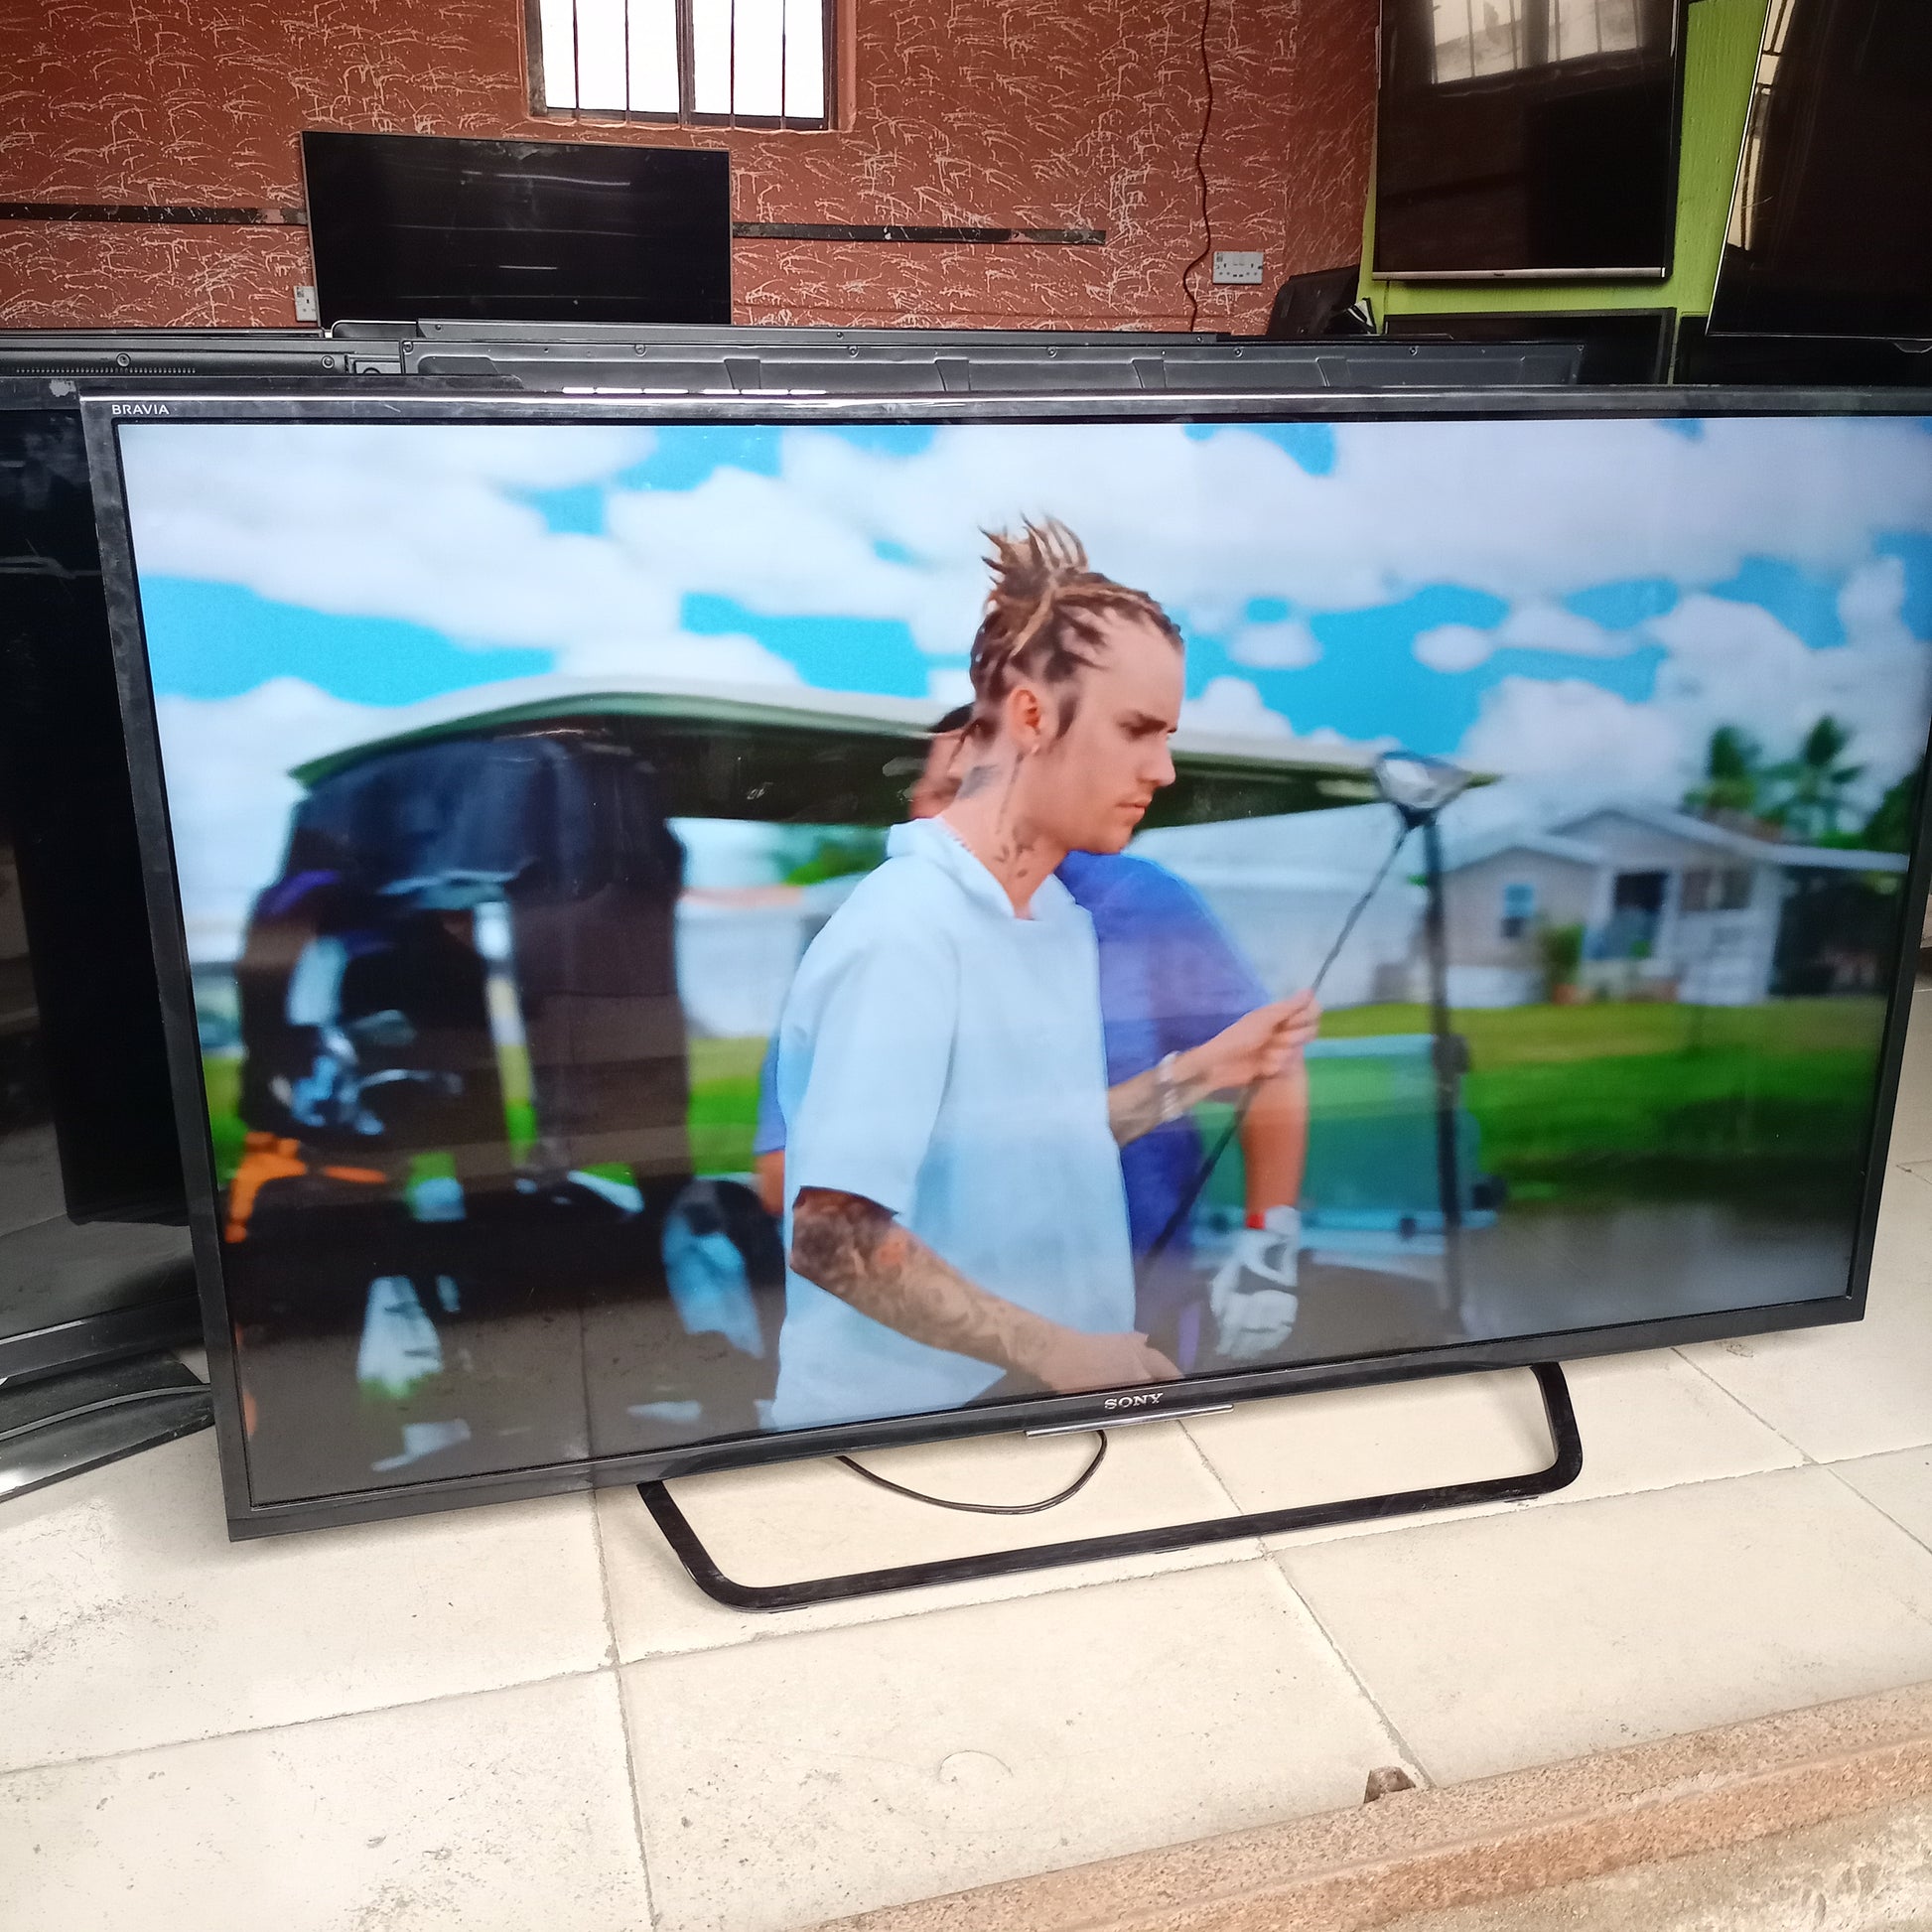 Sony BRAVIA 49 Inch HDR Smart LED TV - London Used